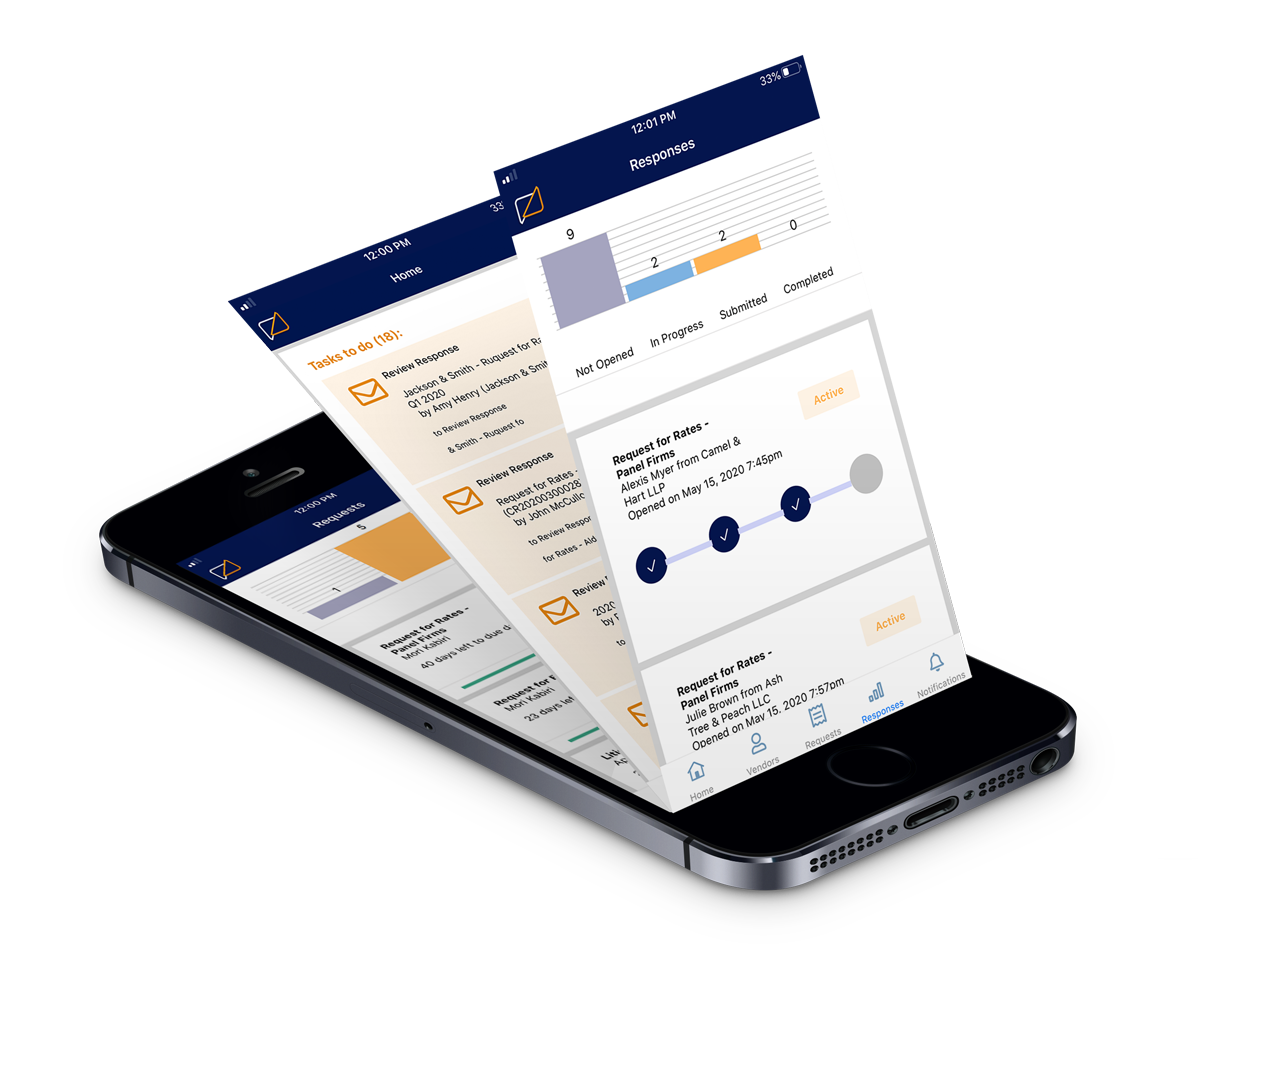 Our companion app helps you and your team easily manage requests and quickly follow up with responses on your mobile device.